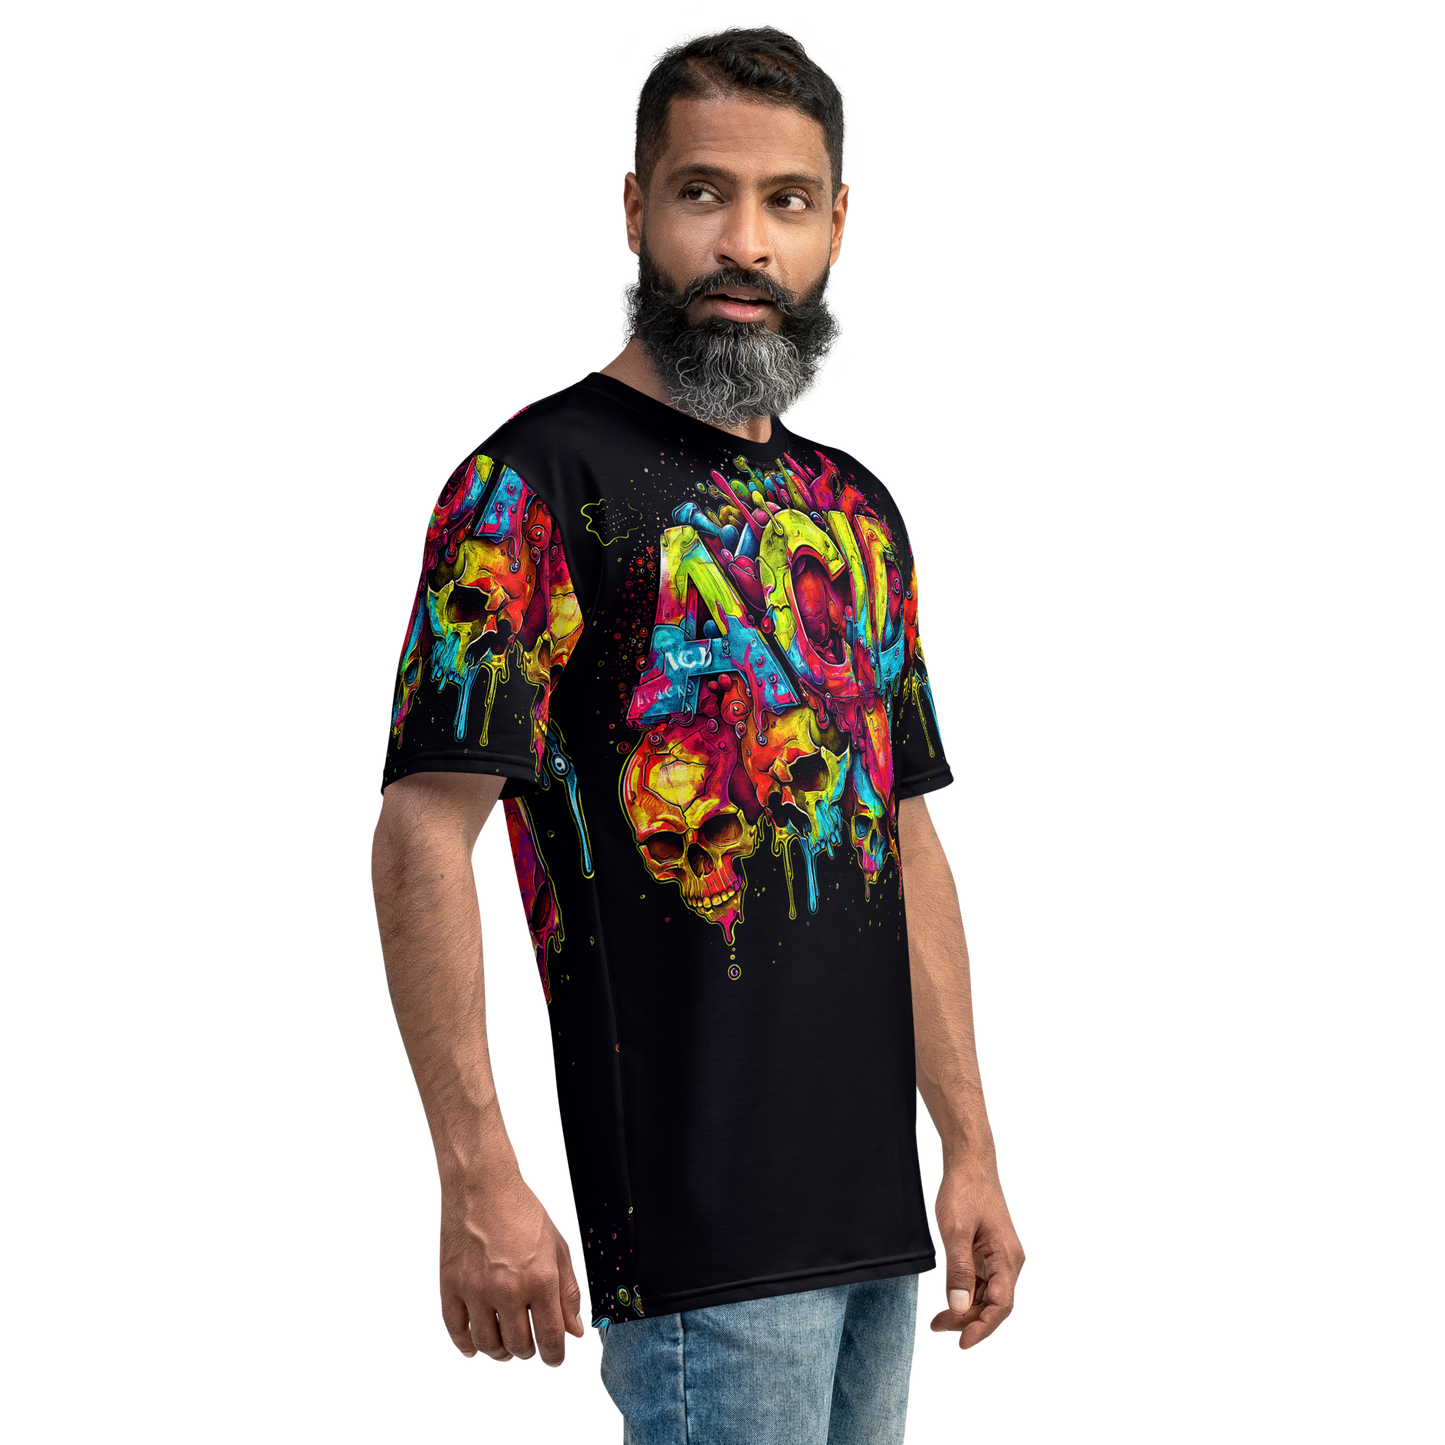 Acid Skulls - Men's t-shirt - limited edition - 27 pieces only